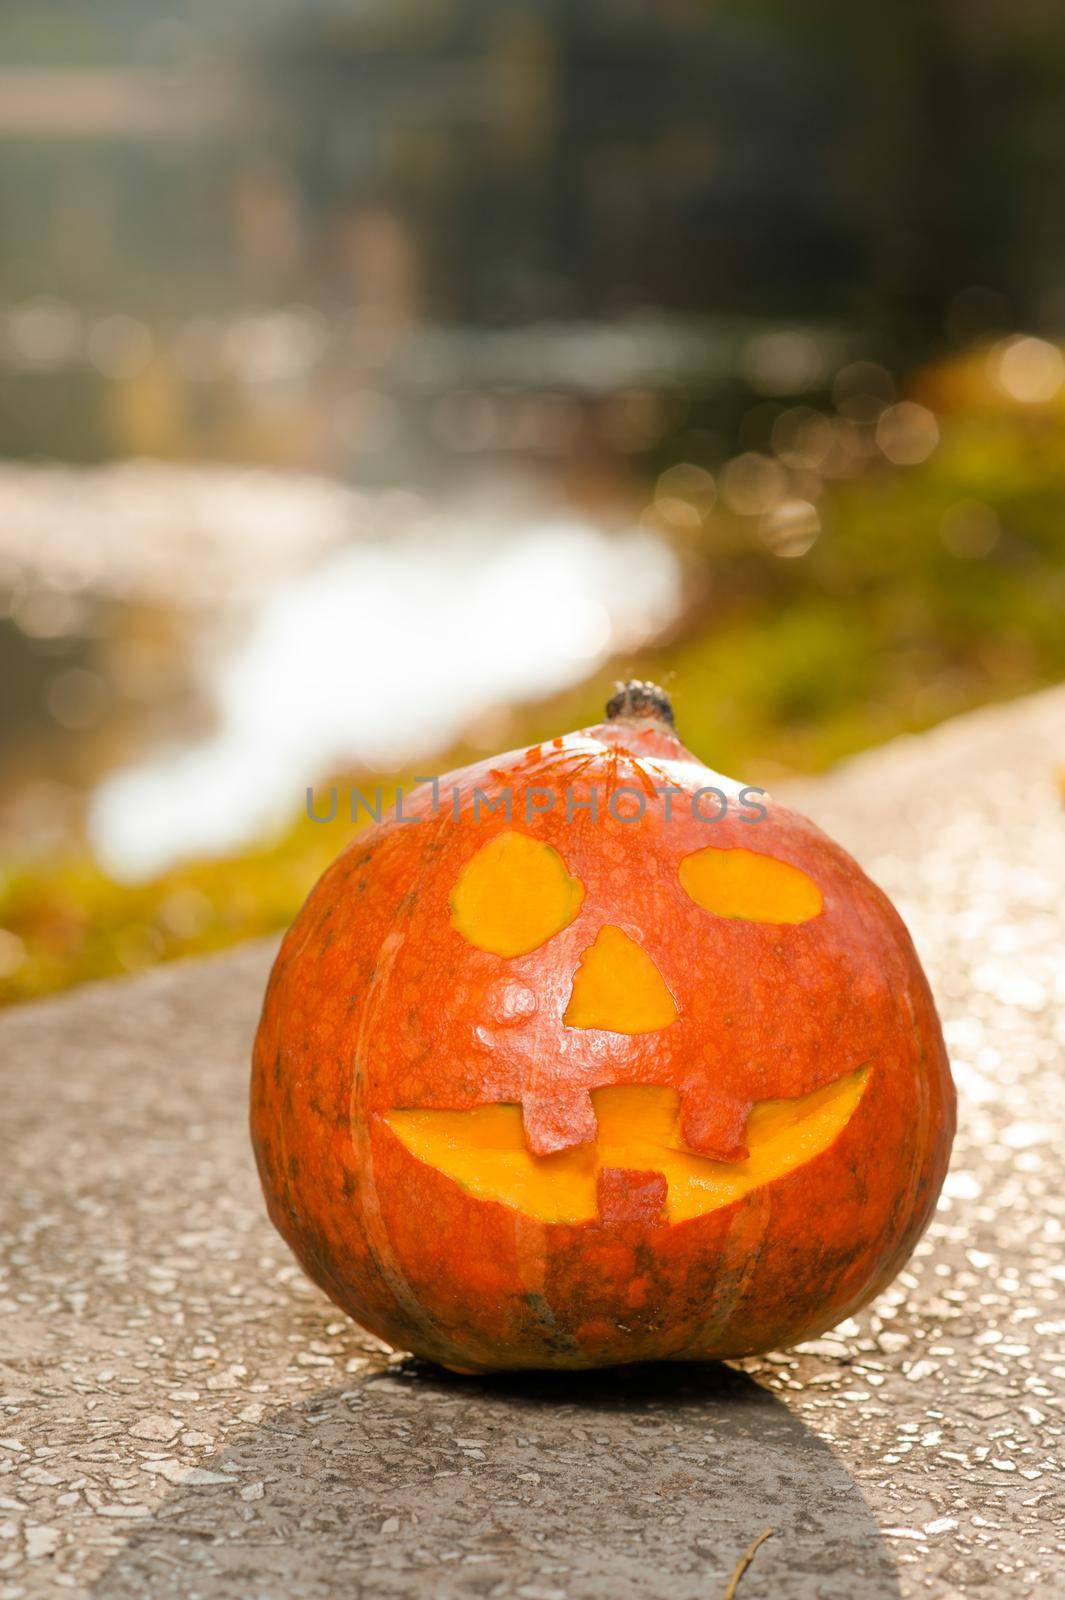 Carved pumpkin with a smiling face by SerhiiBobyk